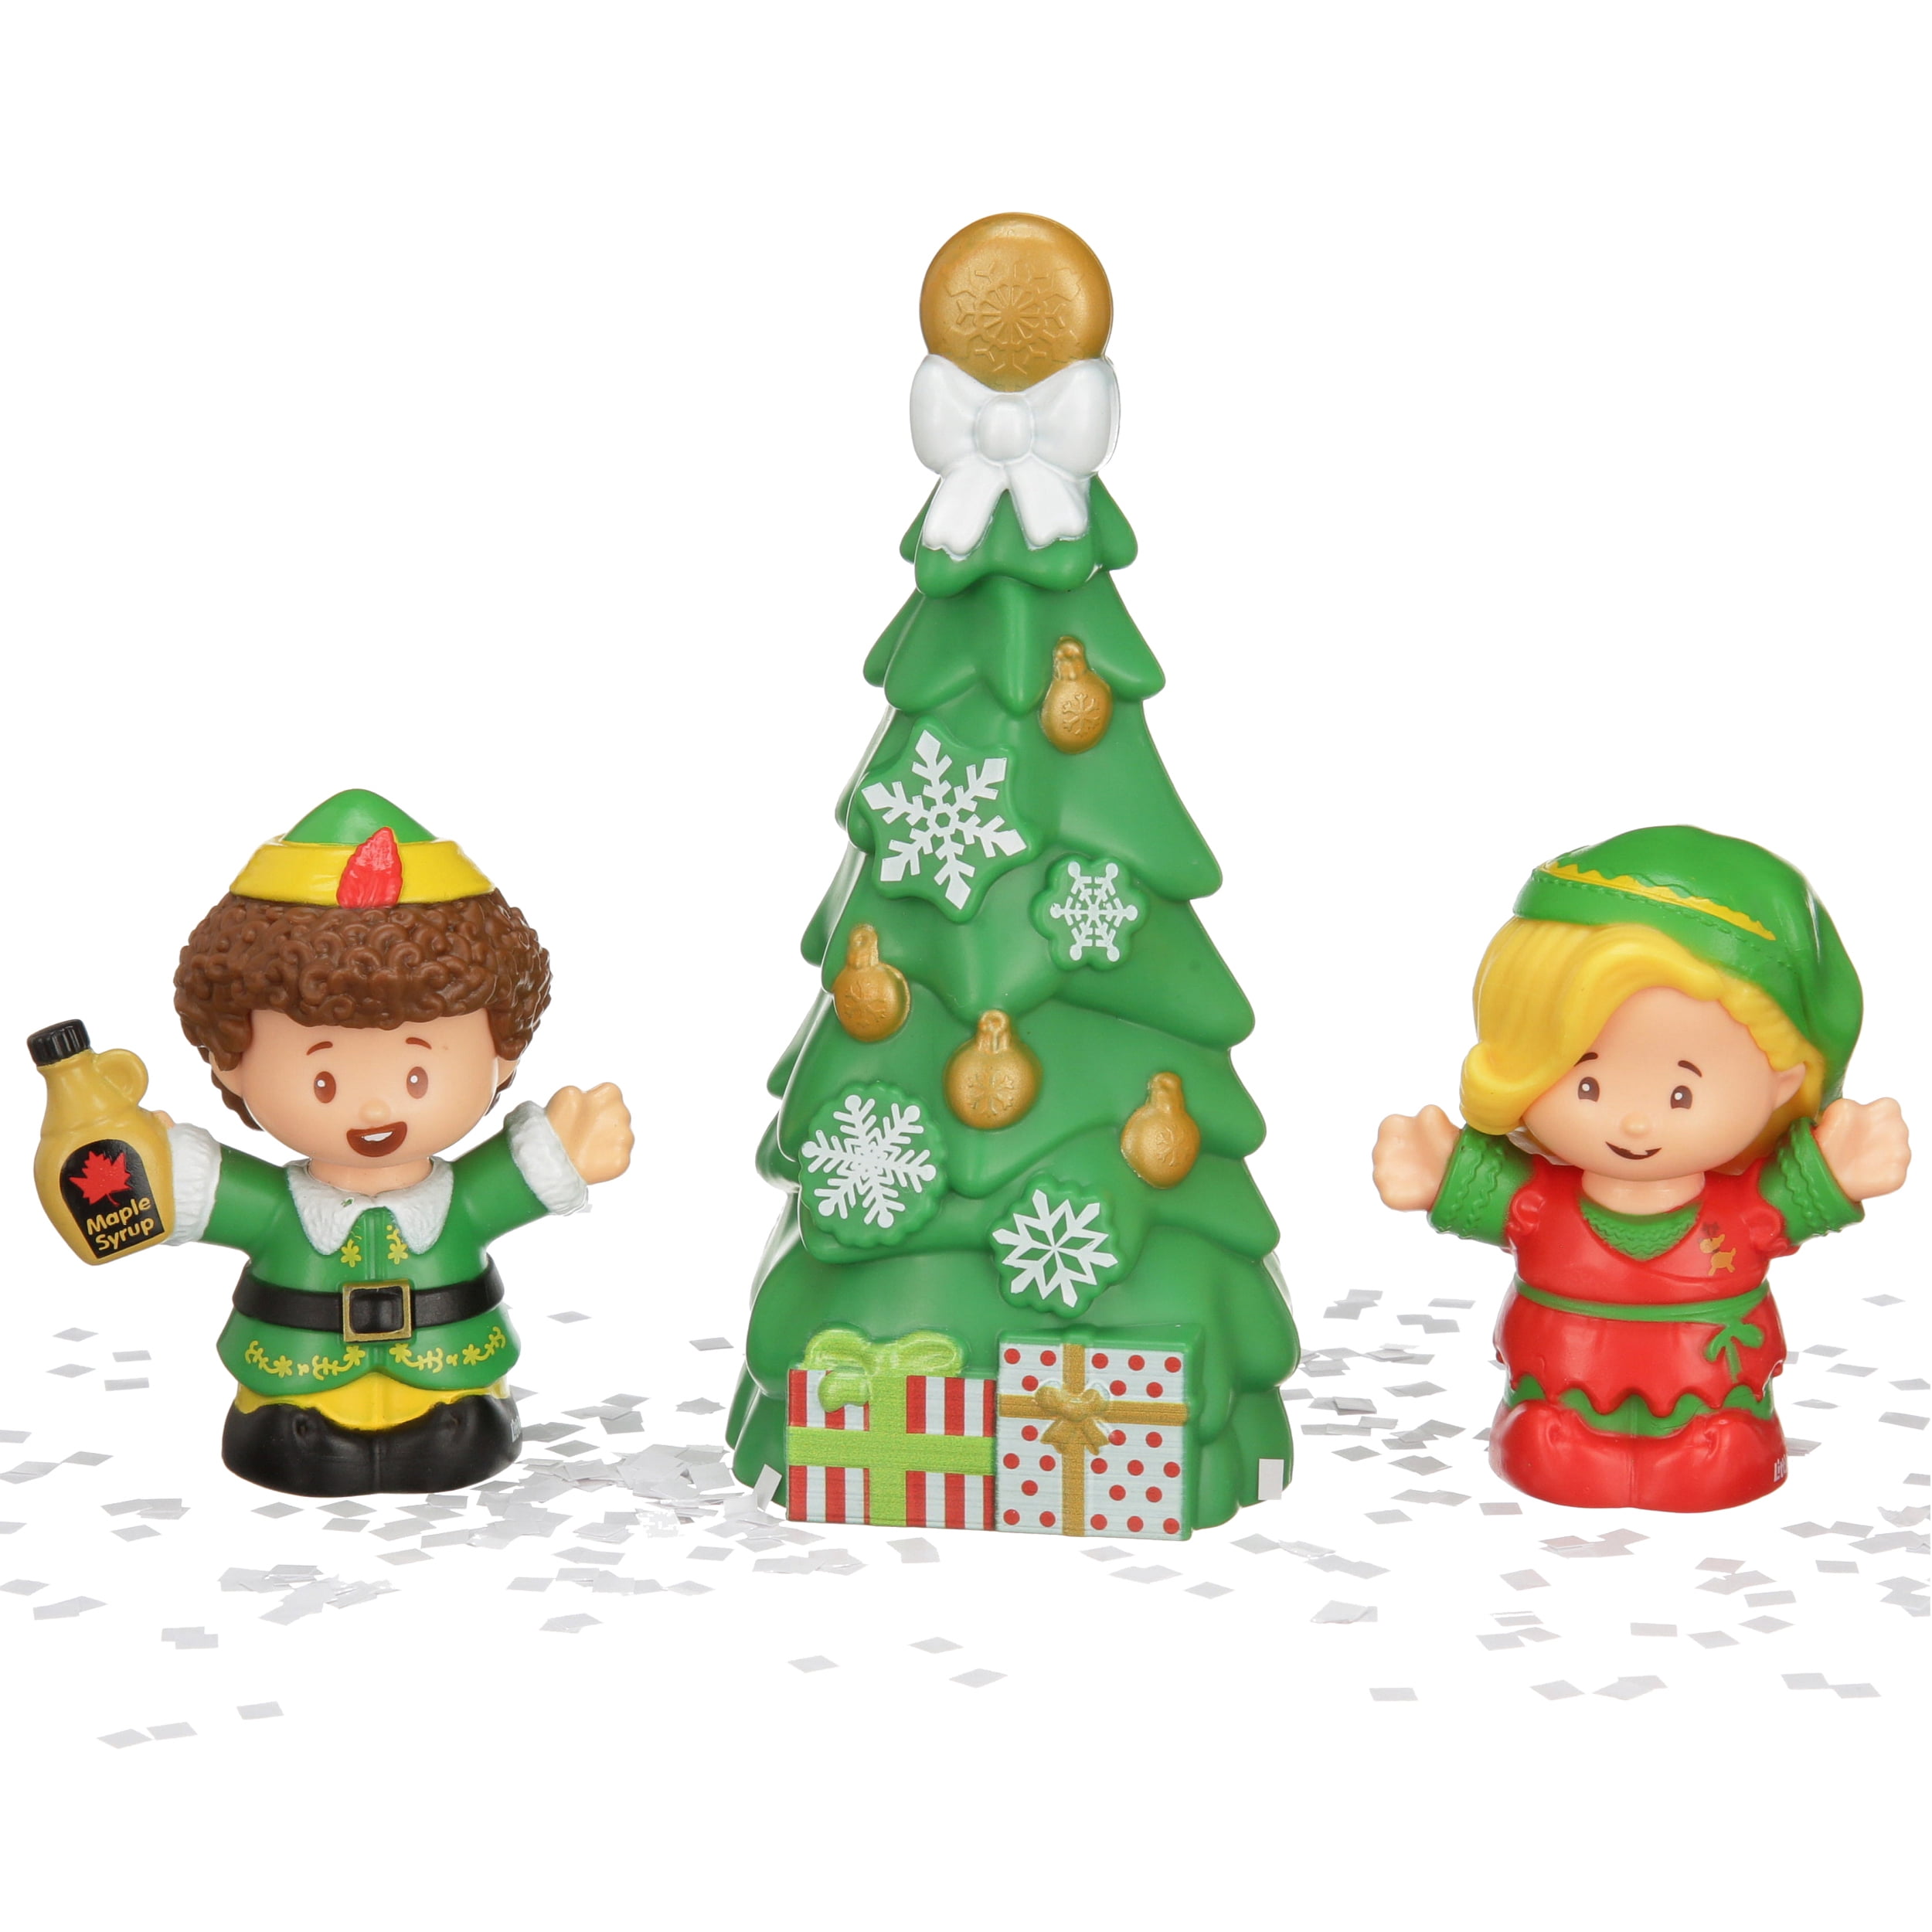 Little People Collector Elf Movie Figure Set 3 Toys for sale online 